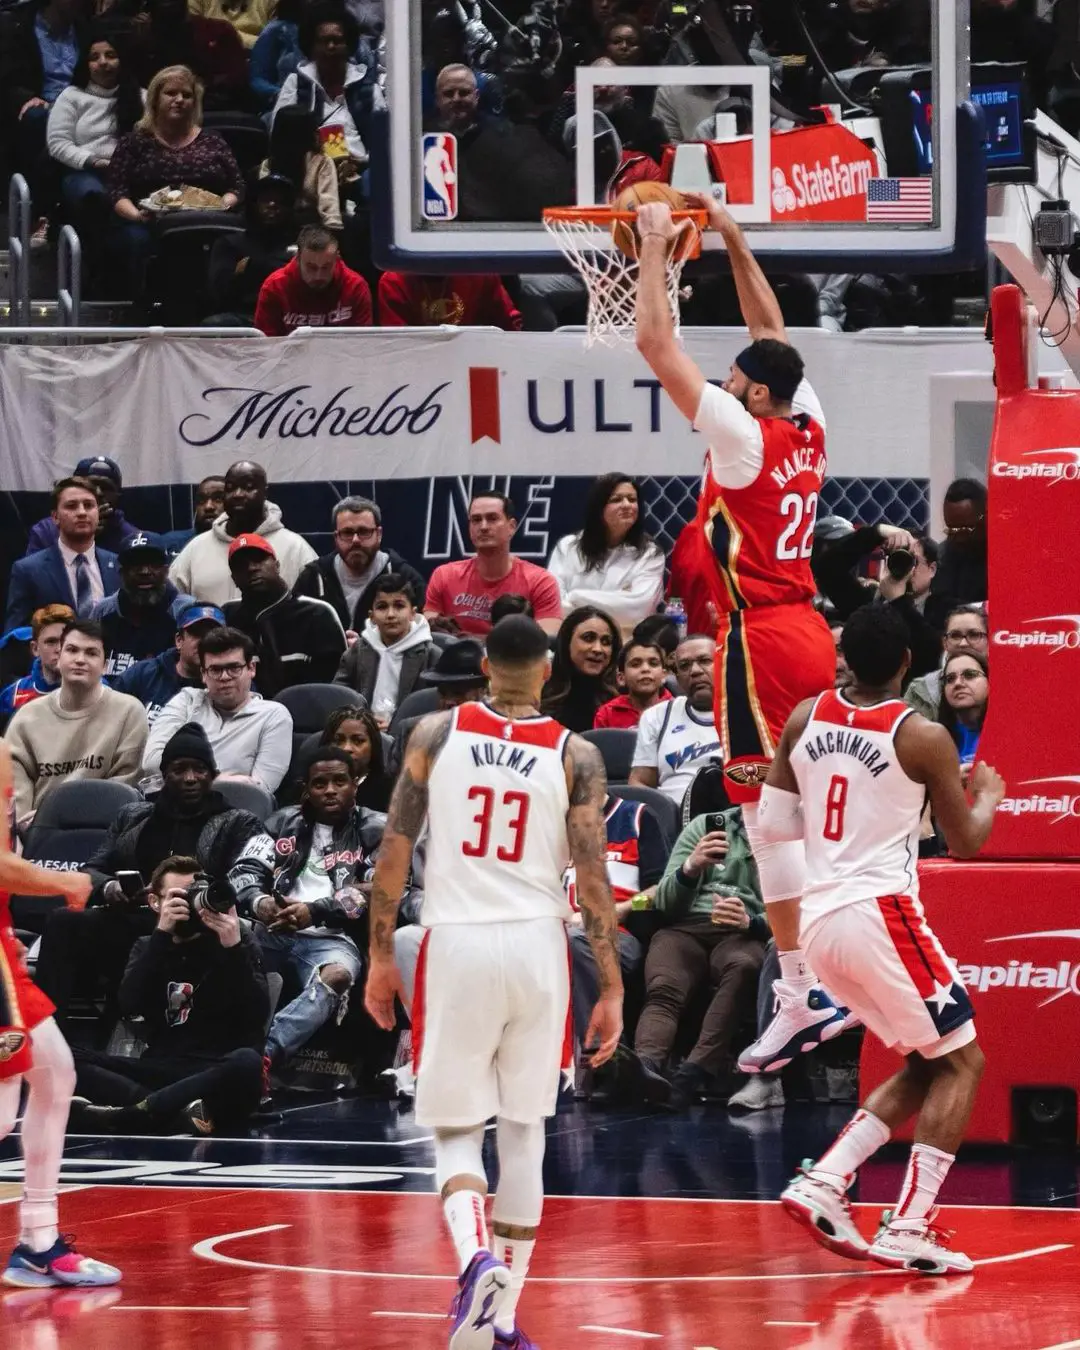 New Orleans Pelicans shooting guard CJ McCollum makes a basket against Washington Wizards on January 10, 2023